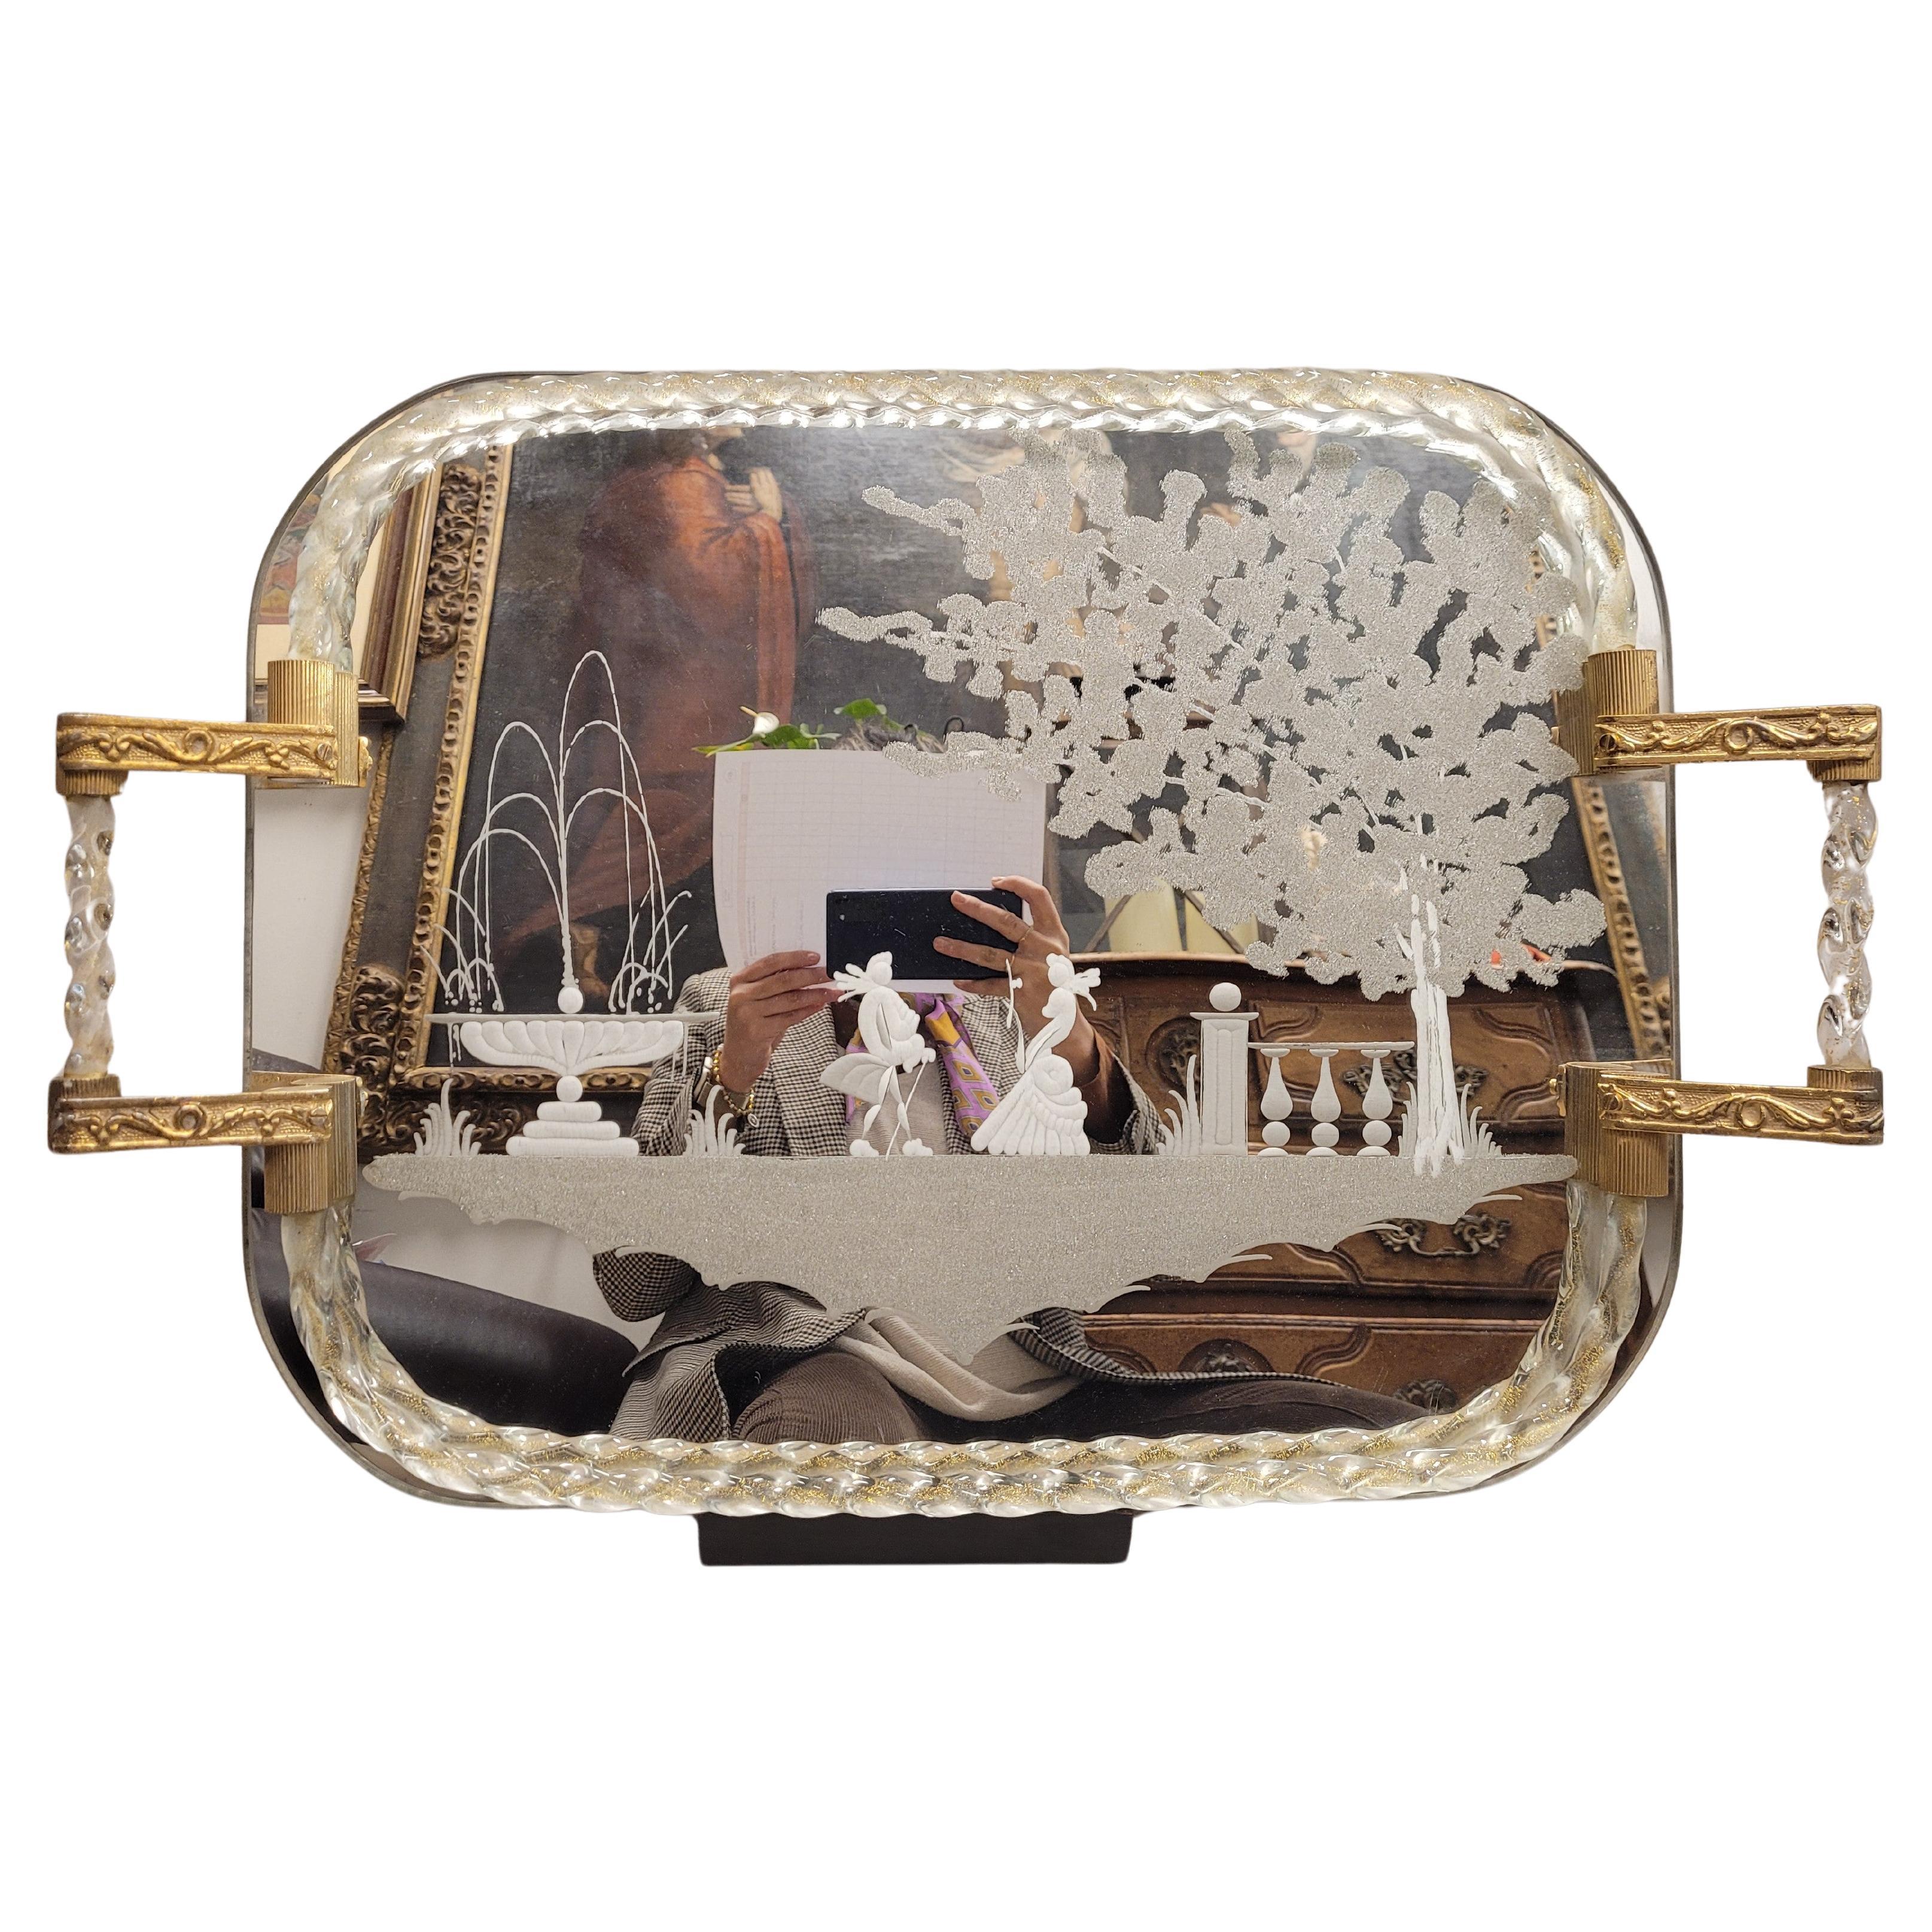 One of a kind and Iconic vanity tray with handles; The rectangular body is a mirror with rounded corners and has been carved from the stone wheel on top by depicting a courtship scene showing a court couple dressed in all their elegant clothing in a